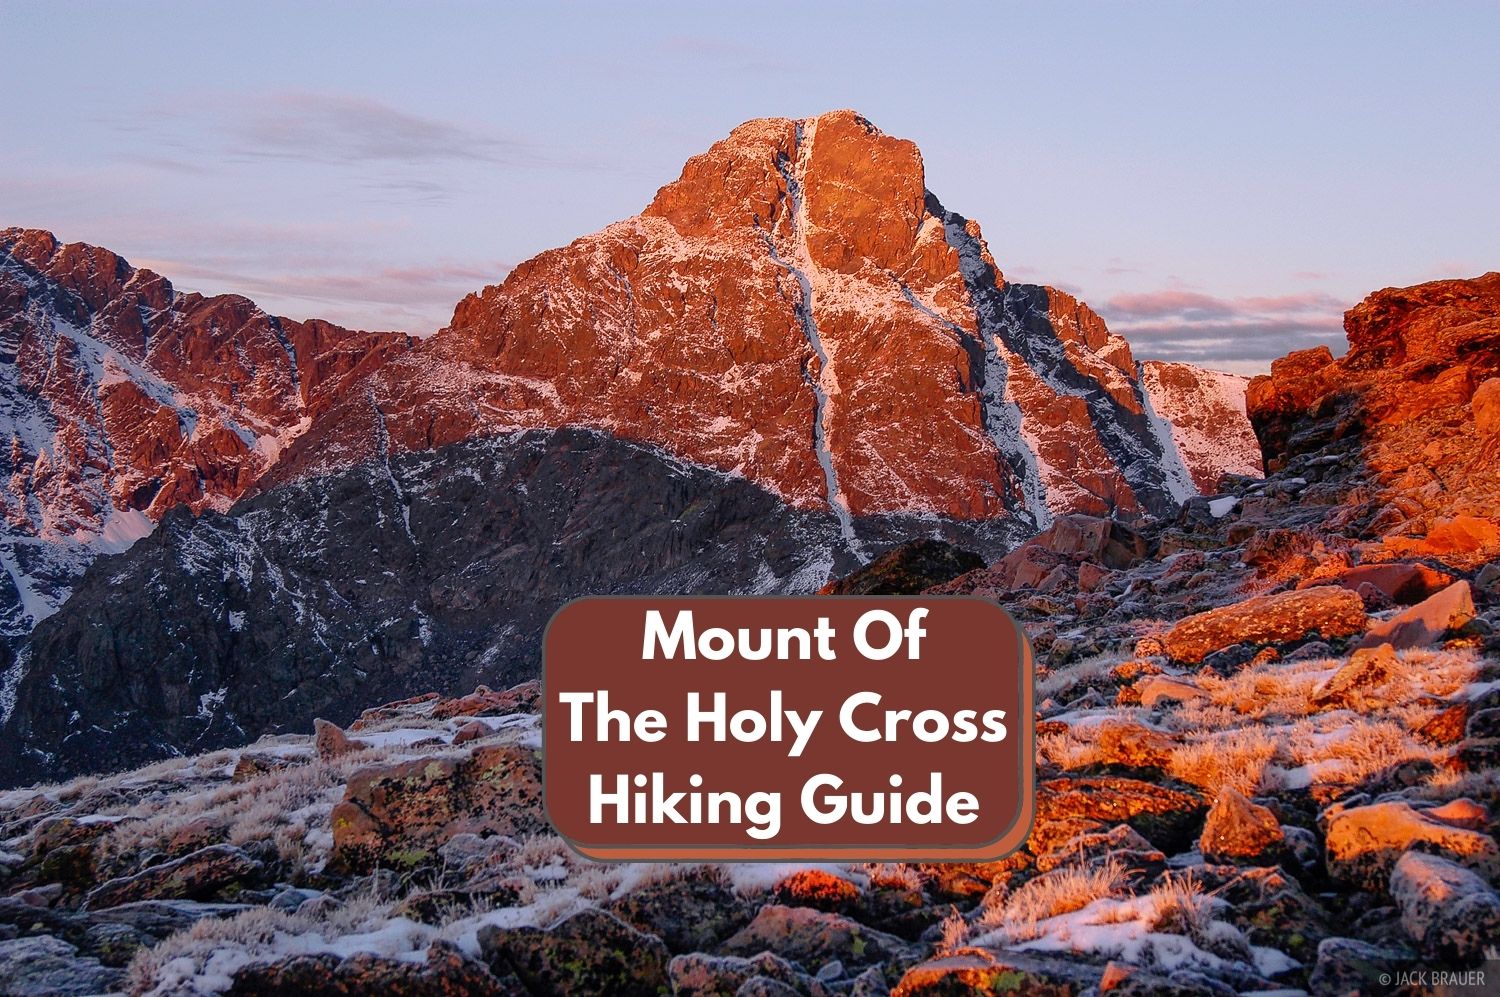 Mount Of The Holy Cross Hiking Guide